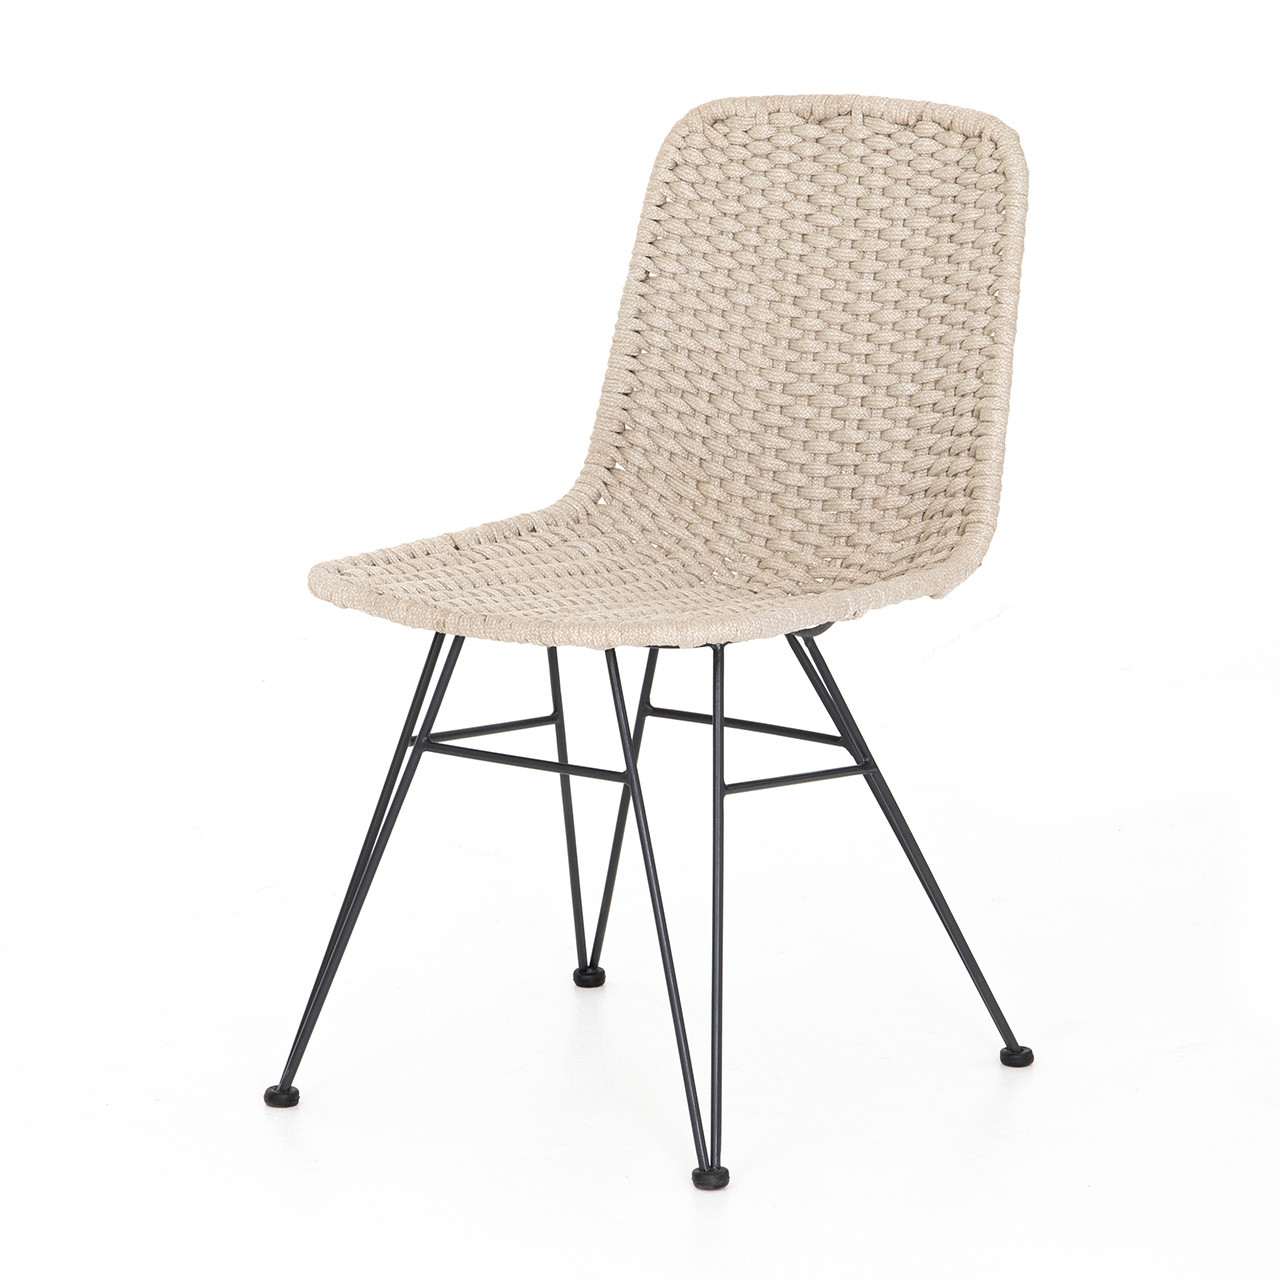 Piazza Rope Outdoor Dining Chair